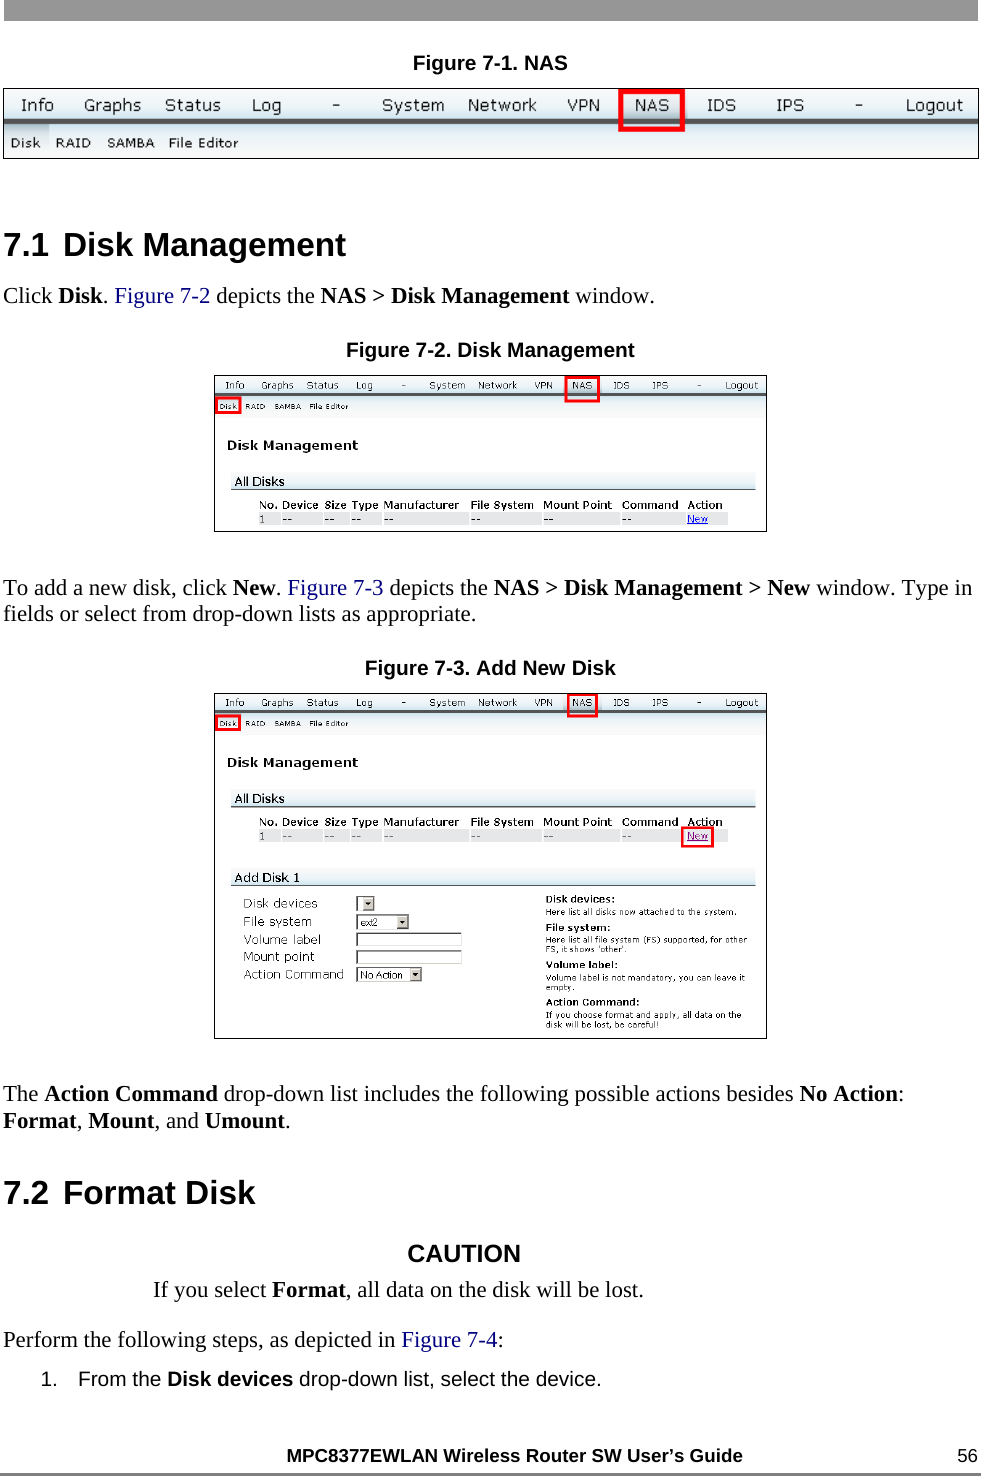                                                          MPC8377EWLAN Wireless Router SW User’s Guide    56 Figure 7-1. NAS  7.1 Disk Management Click Disk. Figure 7-2 depicts the NAS &gt; Disk Management window. Figure 7-2. Disk Management  To add a new disk, click New. Figure 7-3 depicts the NAS &gt; Disk Management &gt; New window. Type in fields or select from drop-down lists as appropriate. Figure 7-3. Add New Disk  The Action Command drop-down list includes the following possible actions besides No Action: Format, Mount, and Umount. 7.2 Format Disk CAUTION If you select Format, all data on the disk will be lost. Perform the following steps, as depicted in Figure 7-4: 1. From the Disk devices drop-down list, select the device. 